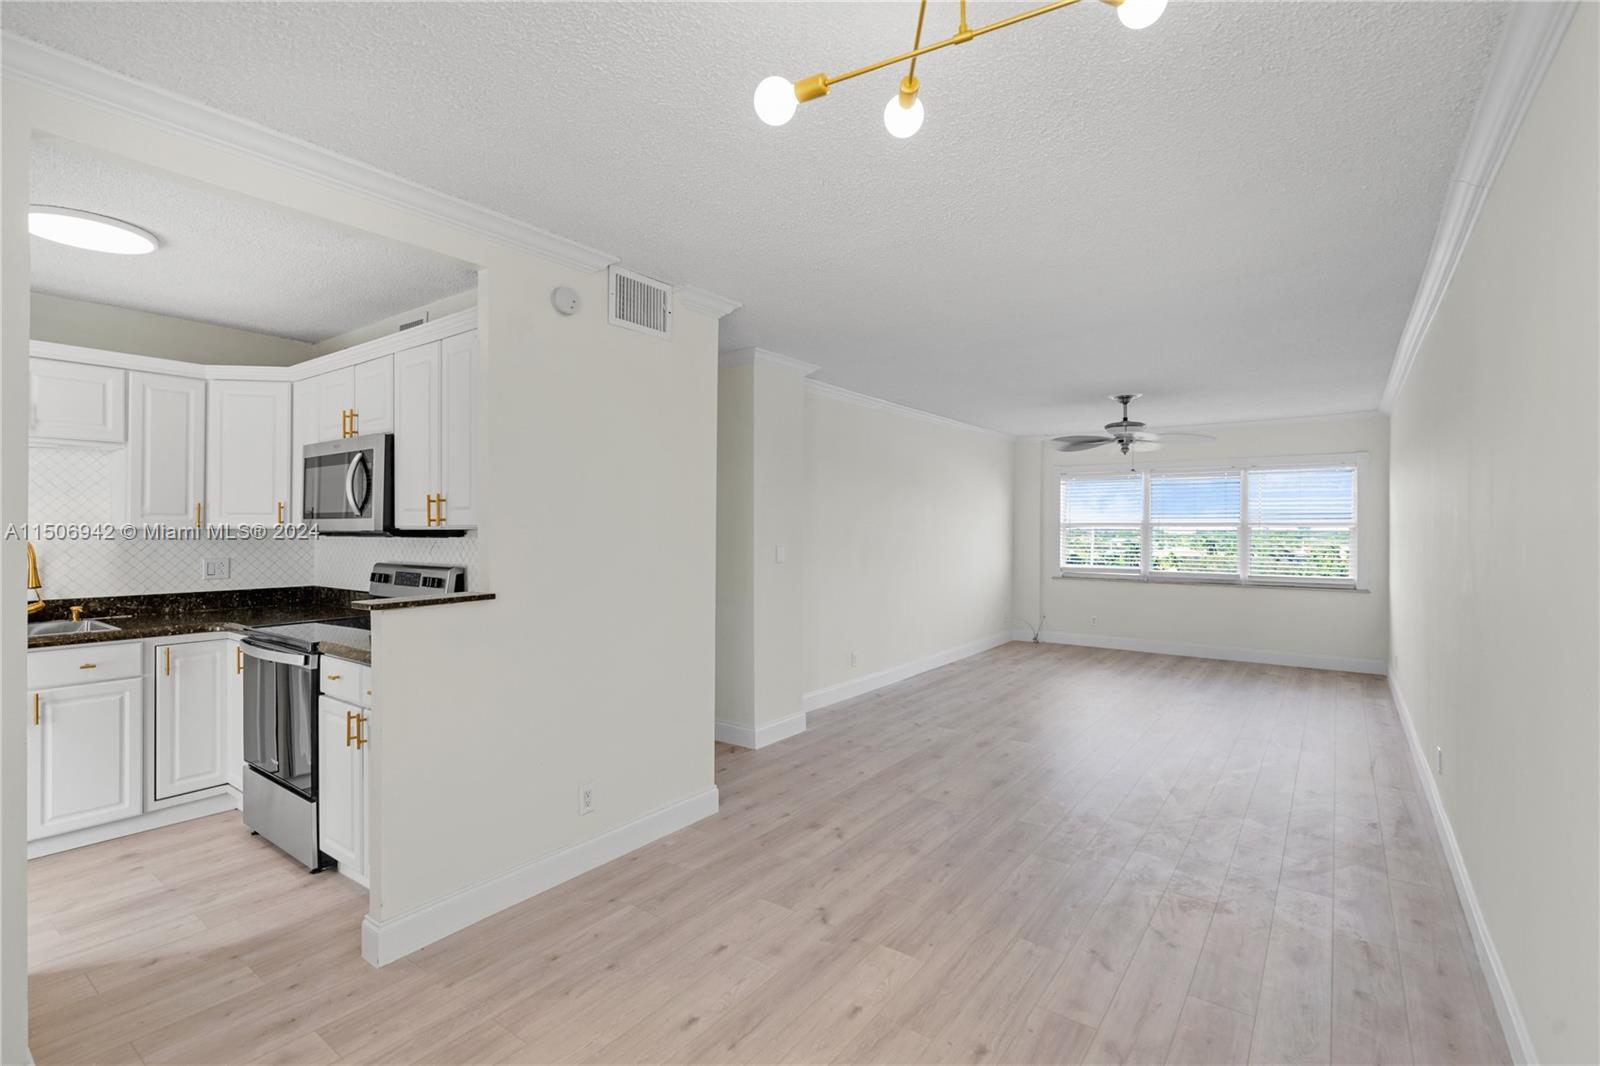 Photo of 2555 NE 11th St #808 in Fort Lauderdale, FL